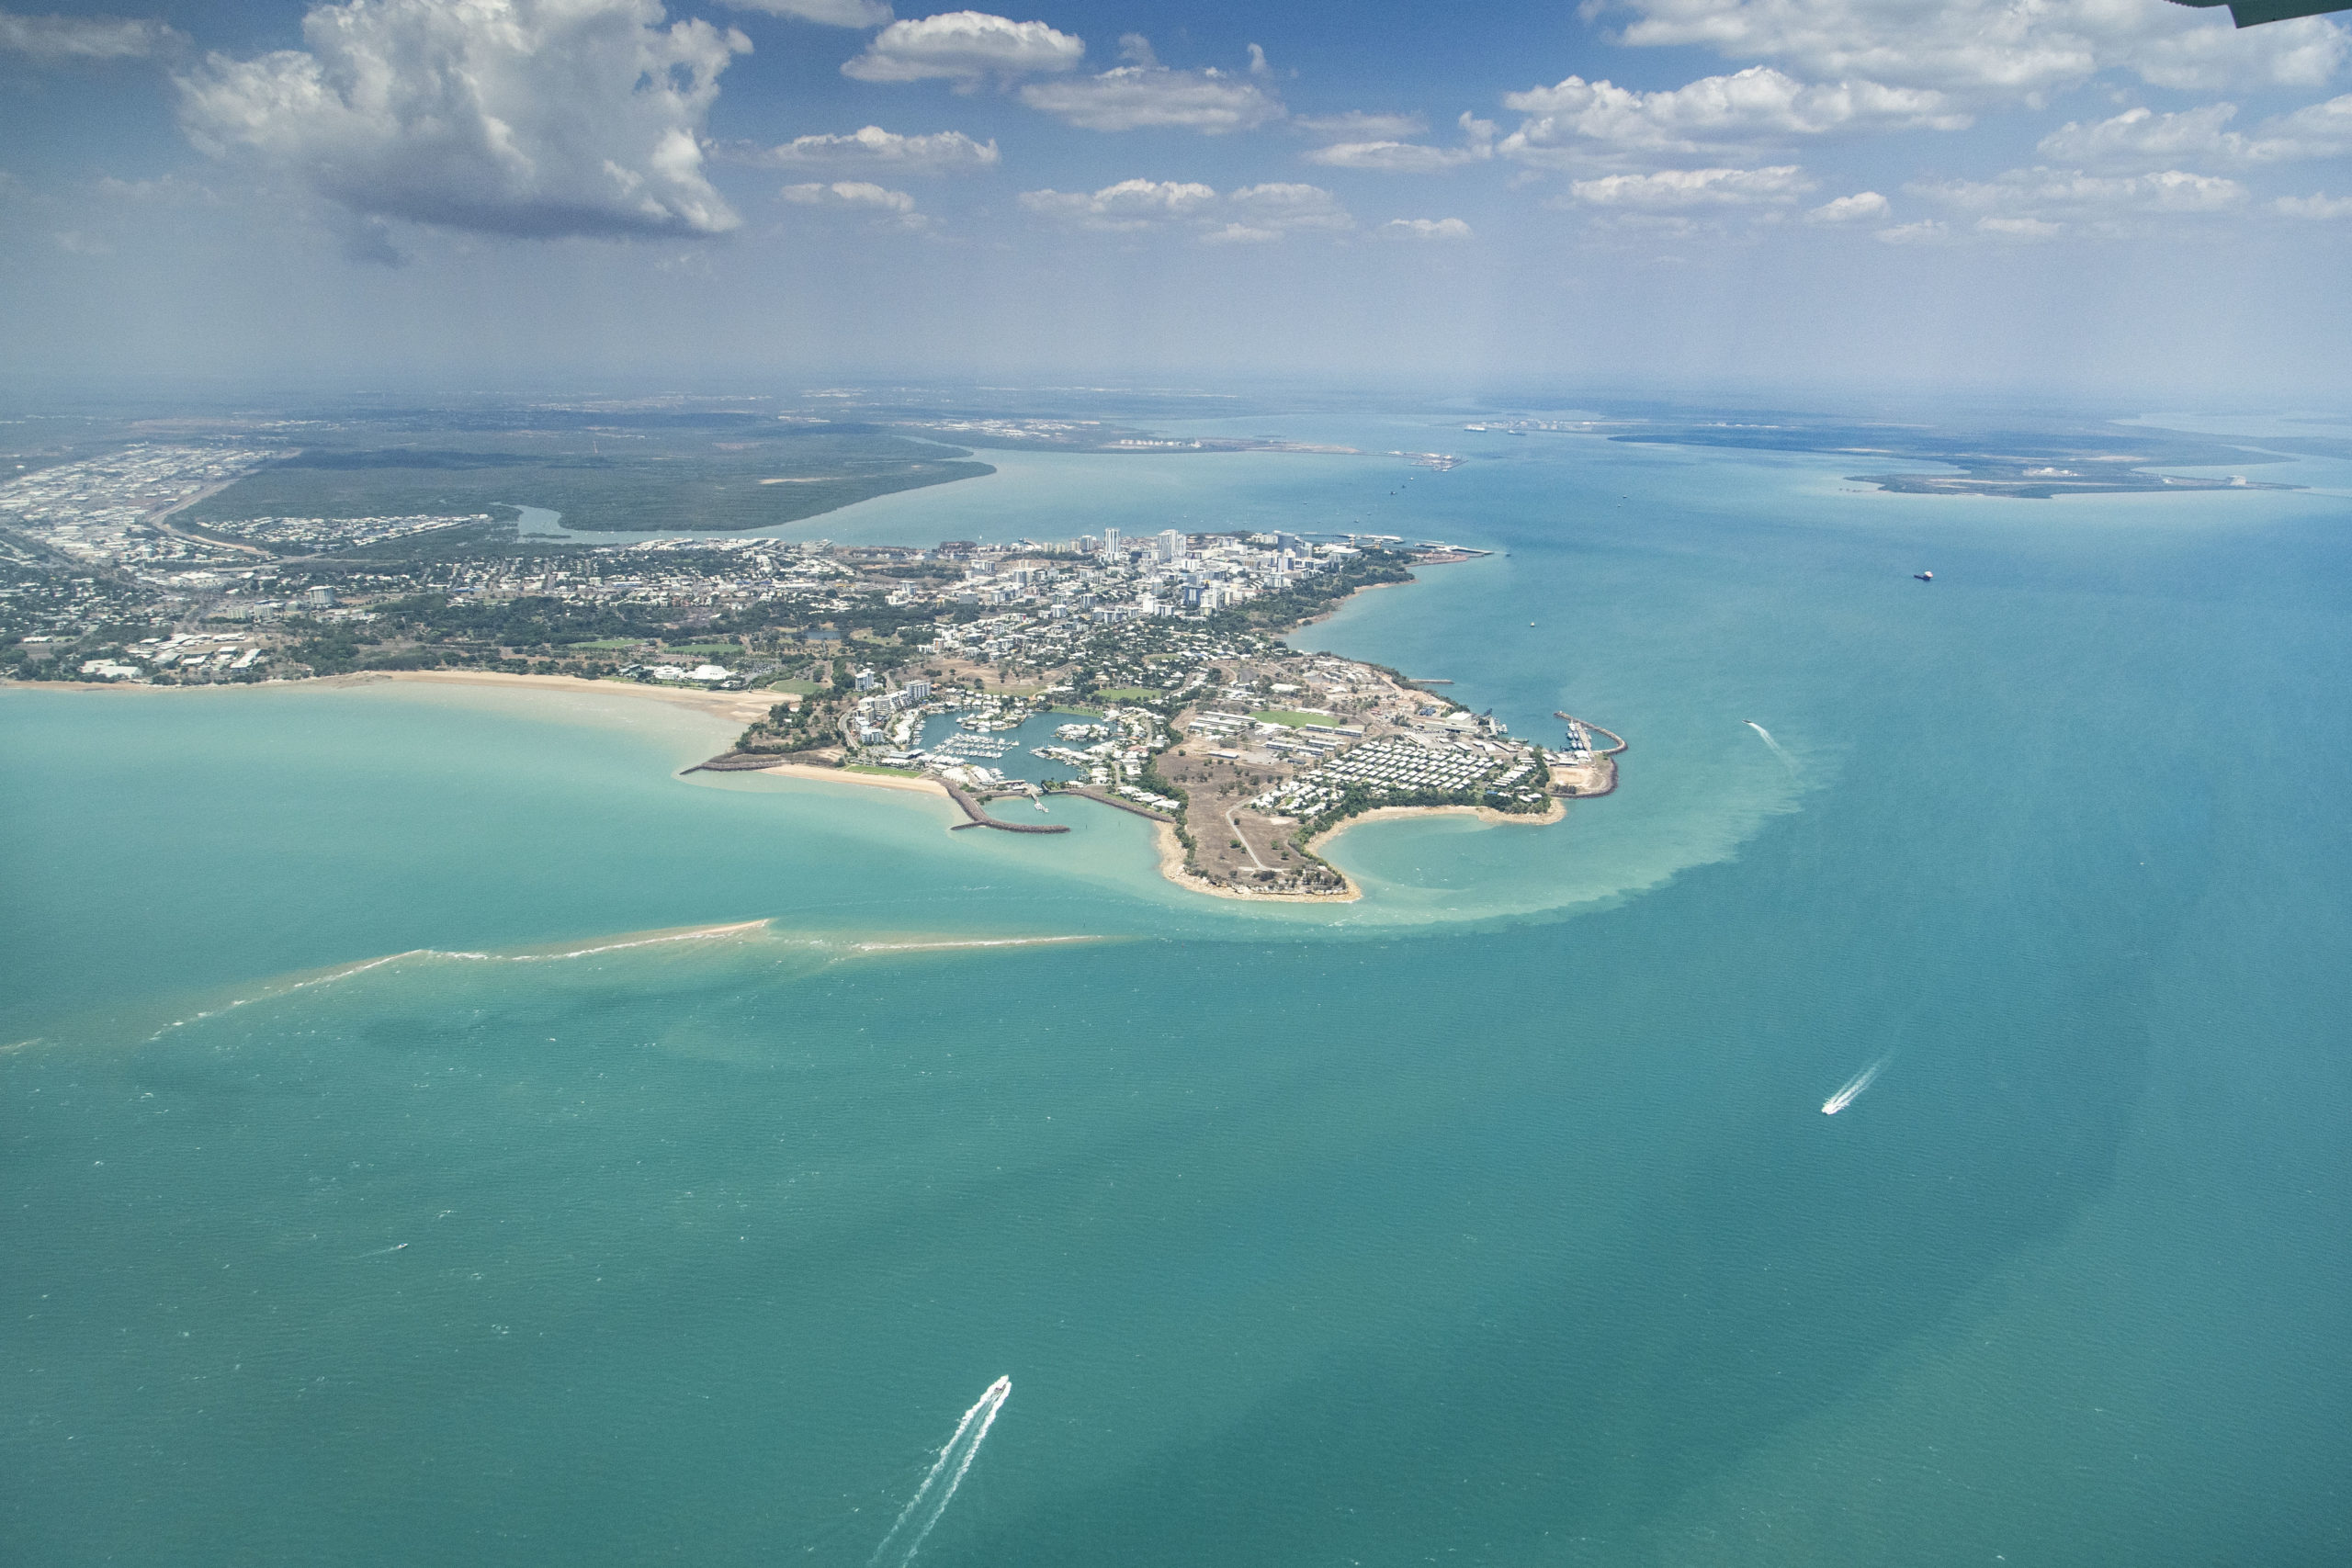 City of Darwin at the entrance of Darwin harbour